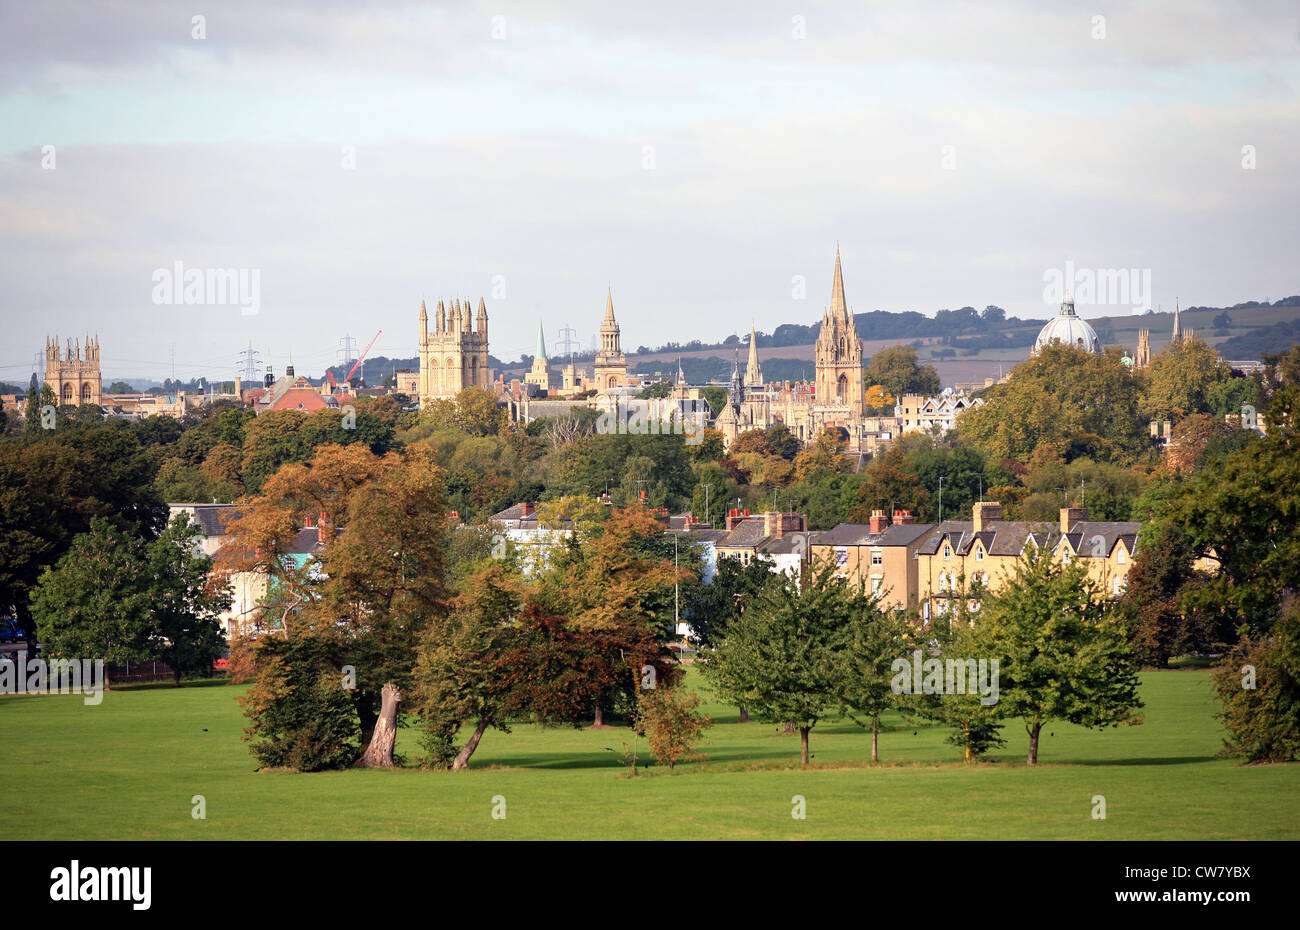 View across a park to the famous university spires of Oxford, England, in autumn Stock Photo